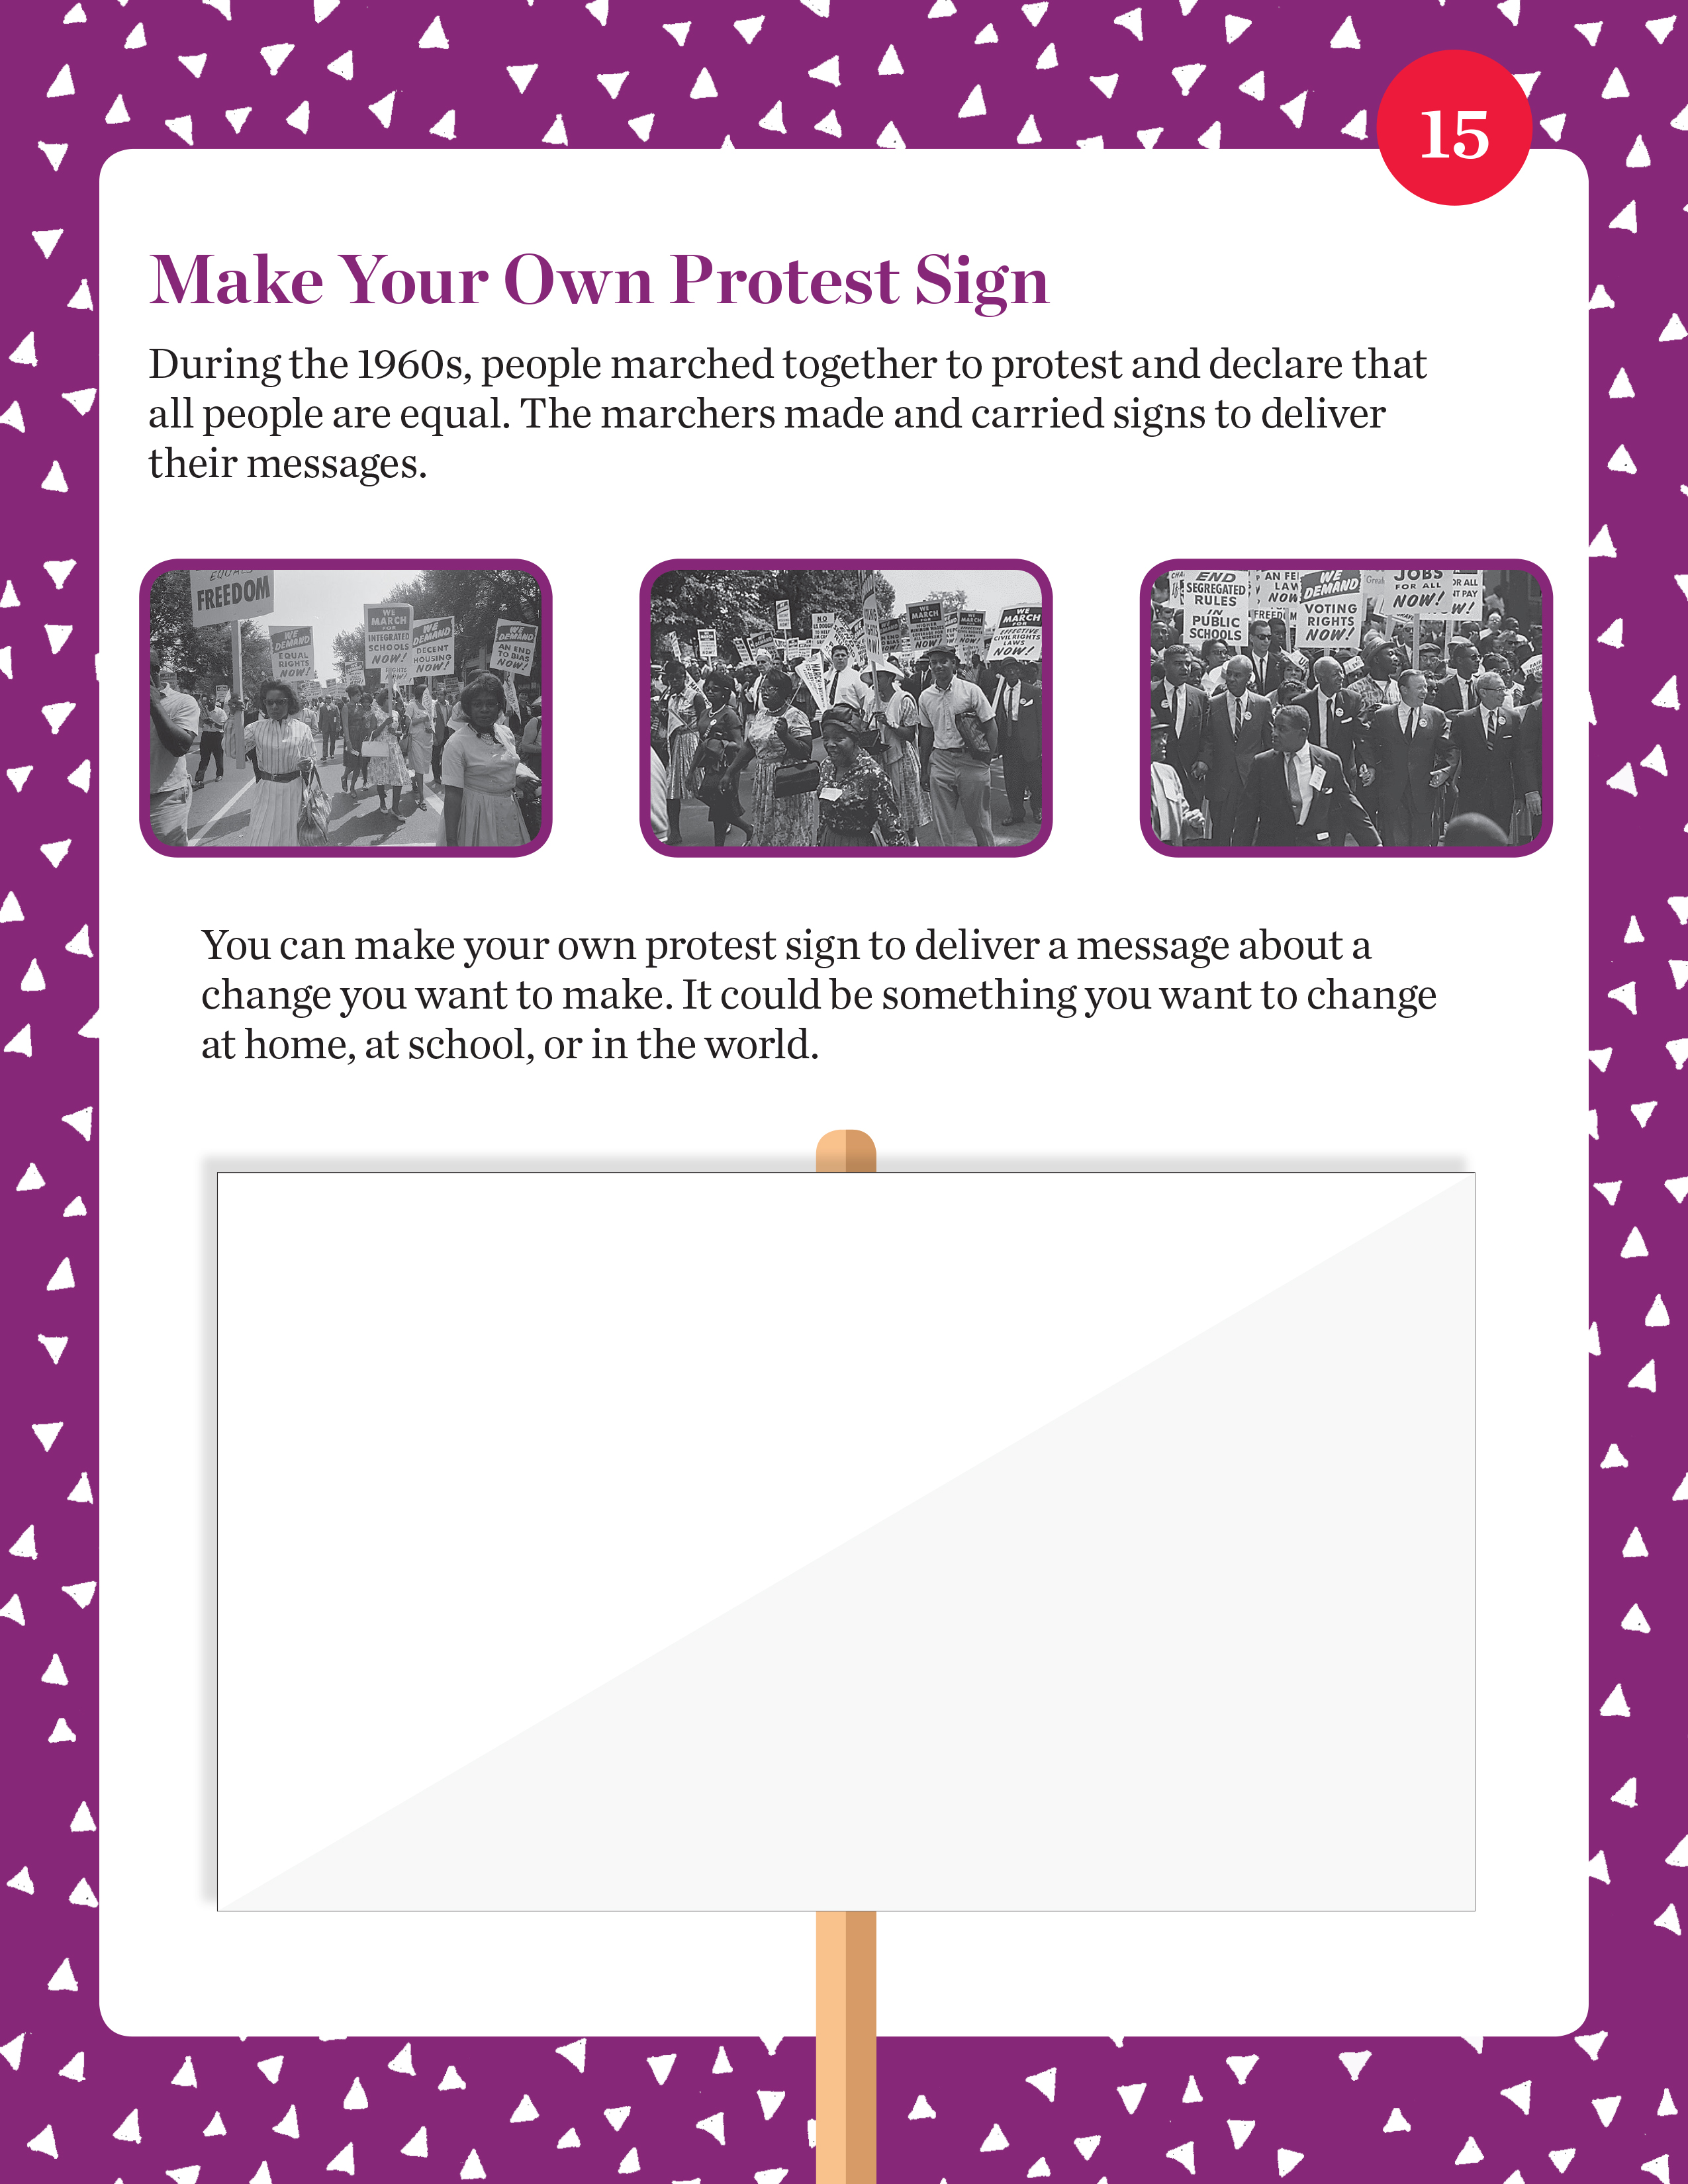 Make Your Own Protest Sign